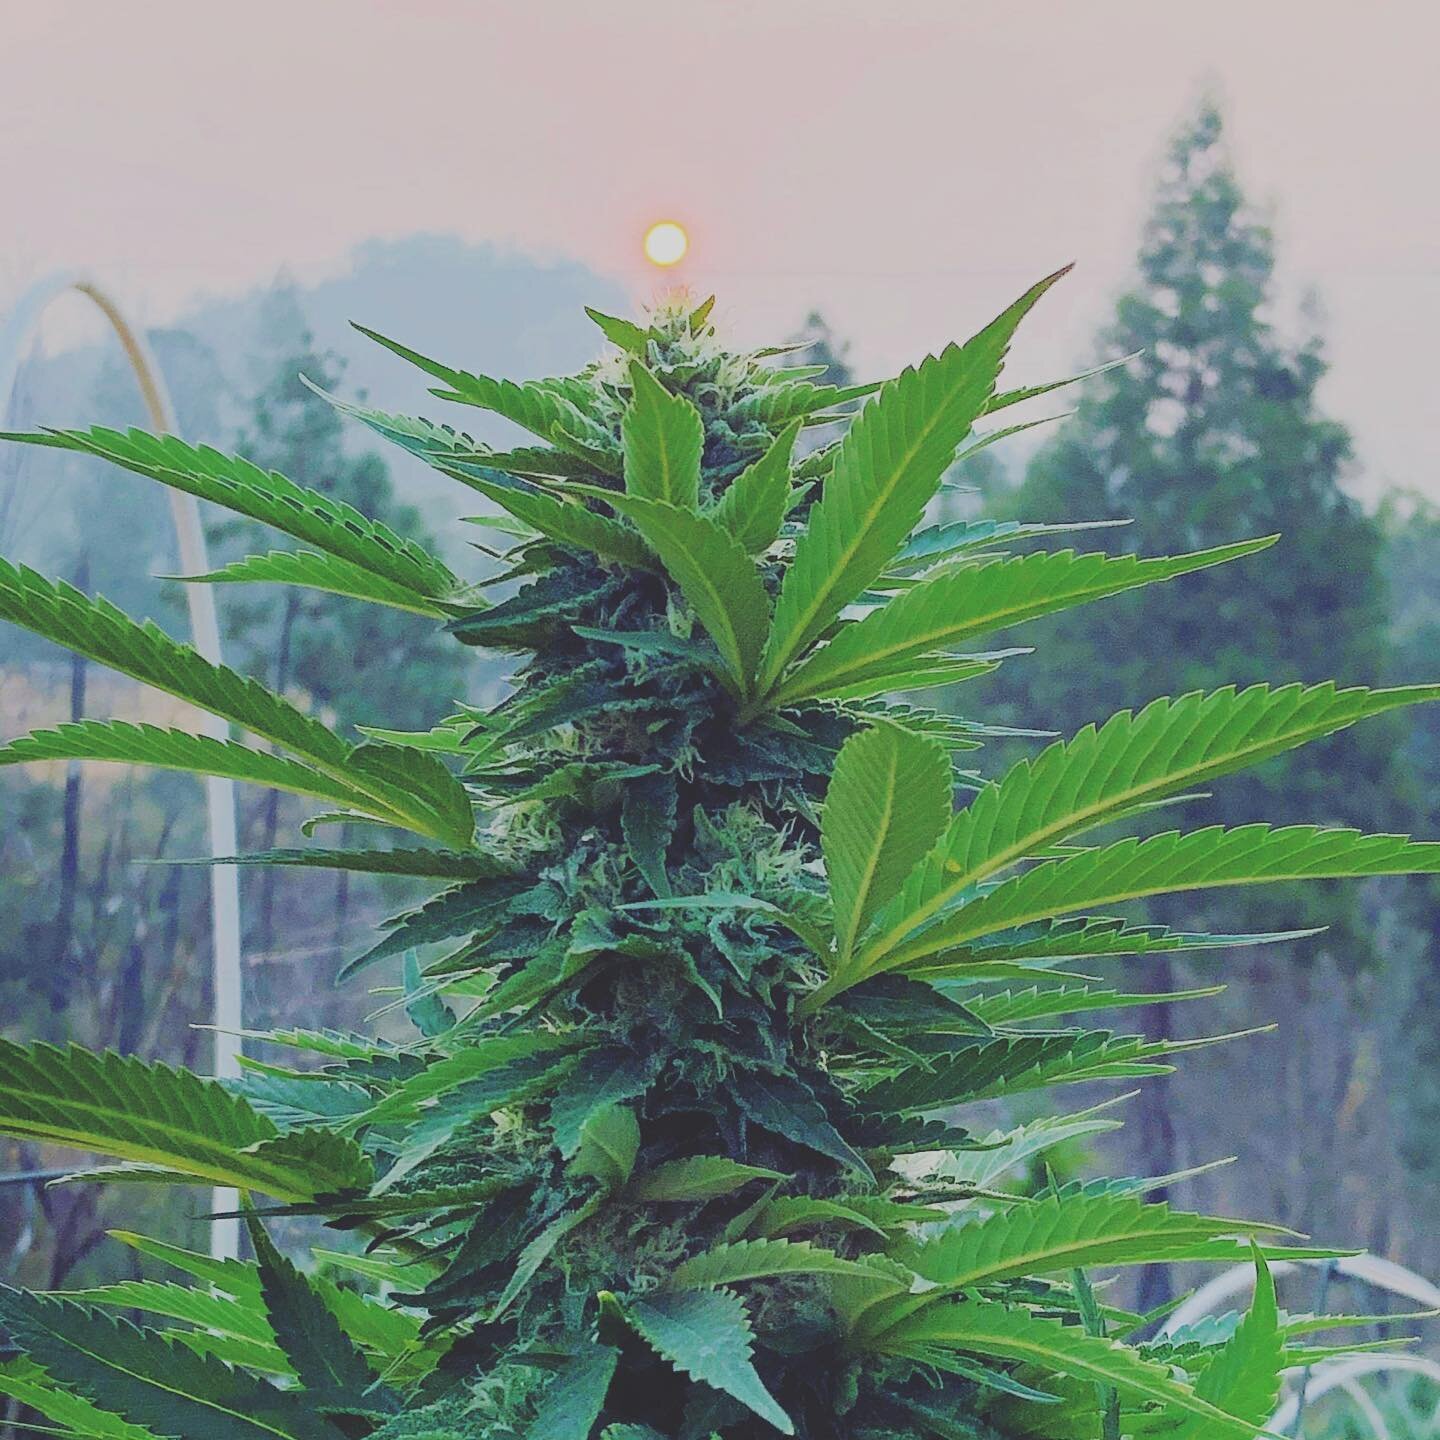 The smoke sure does make for a surreal landscape walking around the garden. Wishing the best to all our fellow cultivators around the state being affected by these fires.
Strain: Oscillator OG
Breeder: @curious_cultivar 
📸: @naldoross03 
#bonneterre